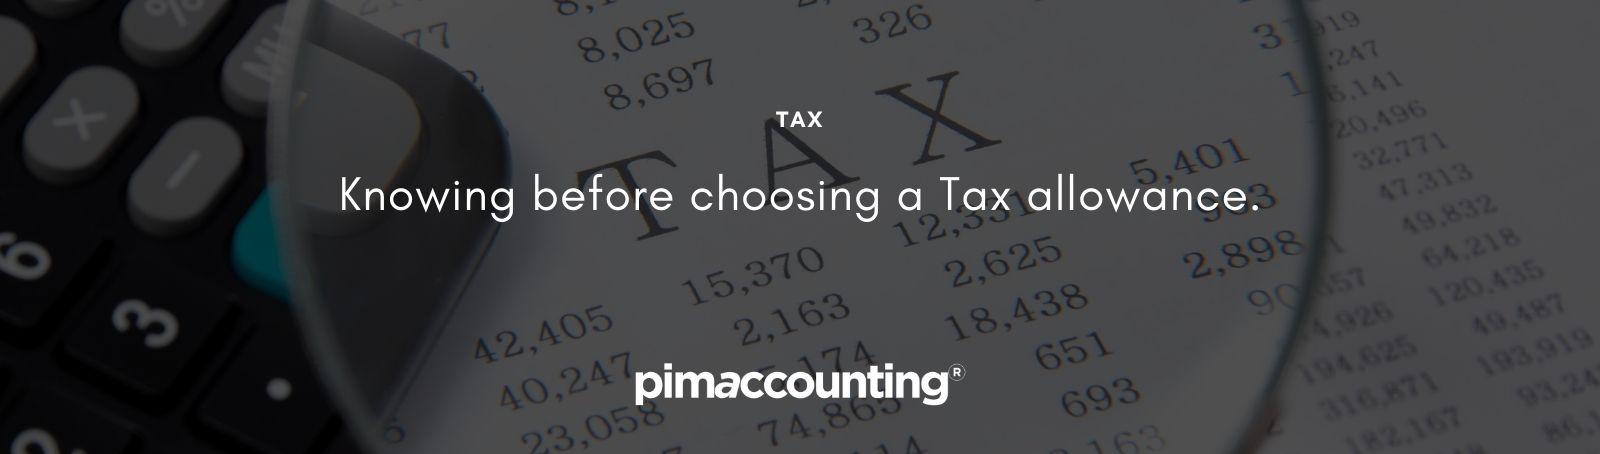 Knowing before choosing a Tax allowance